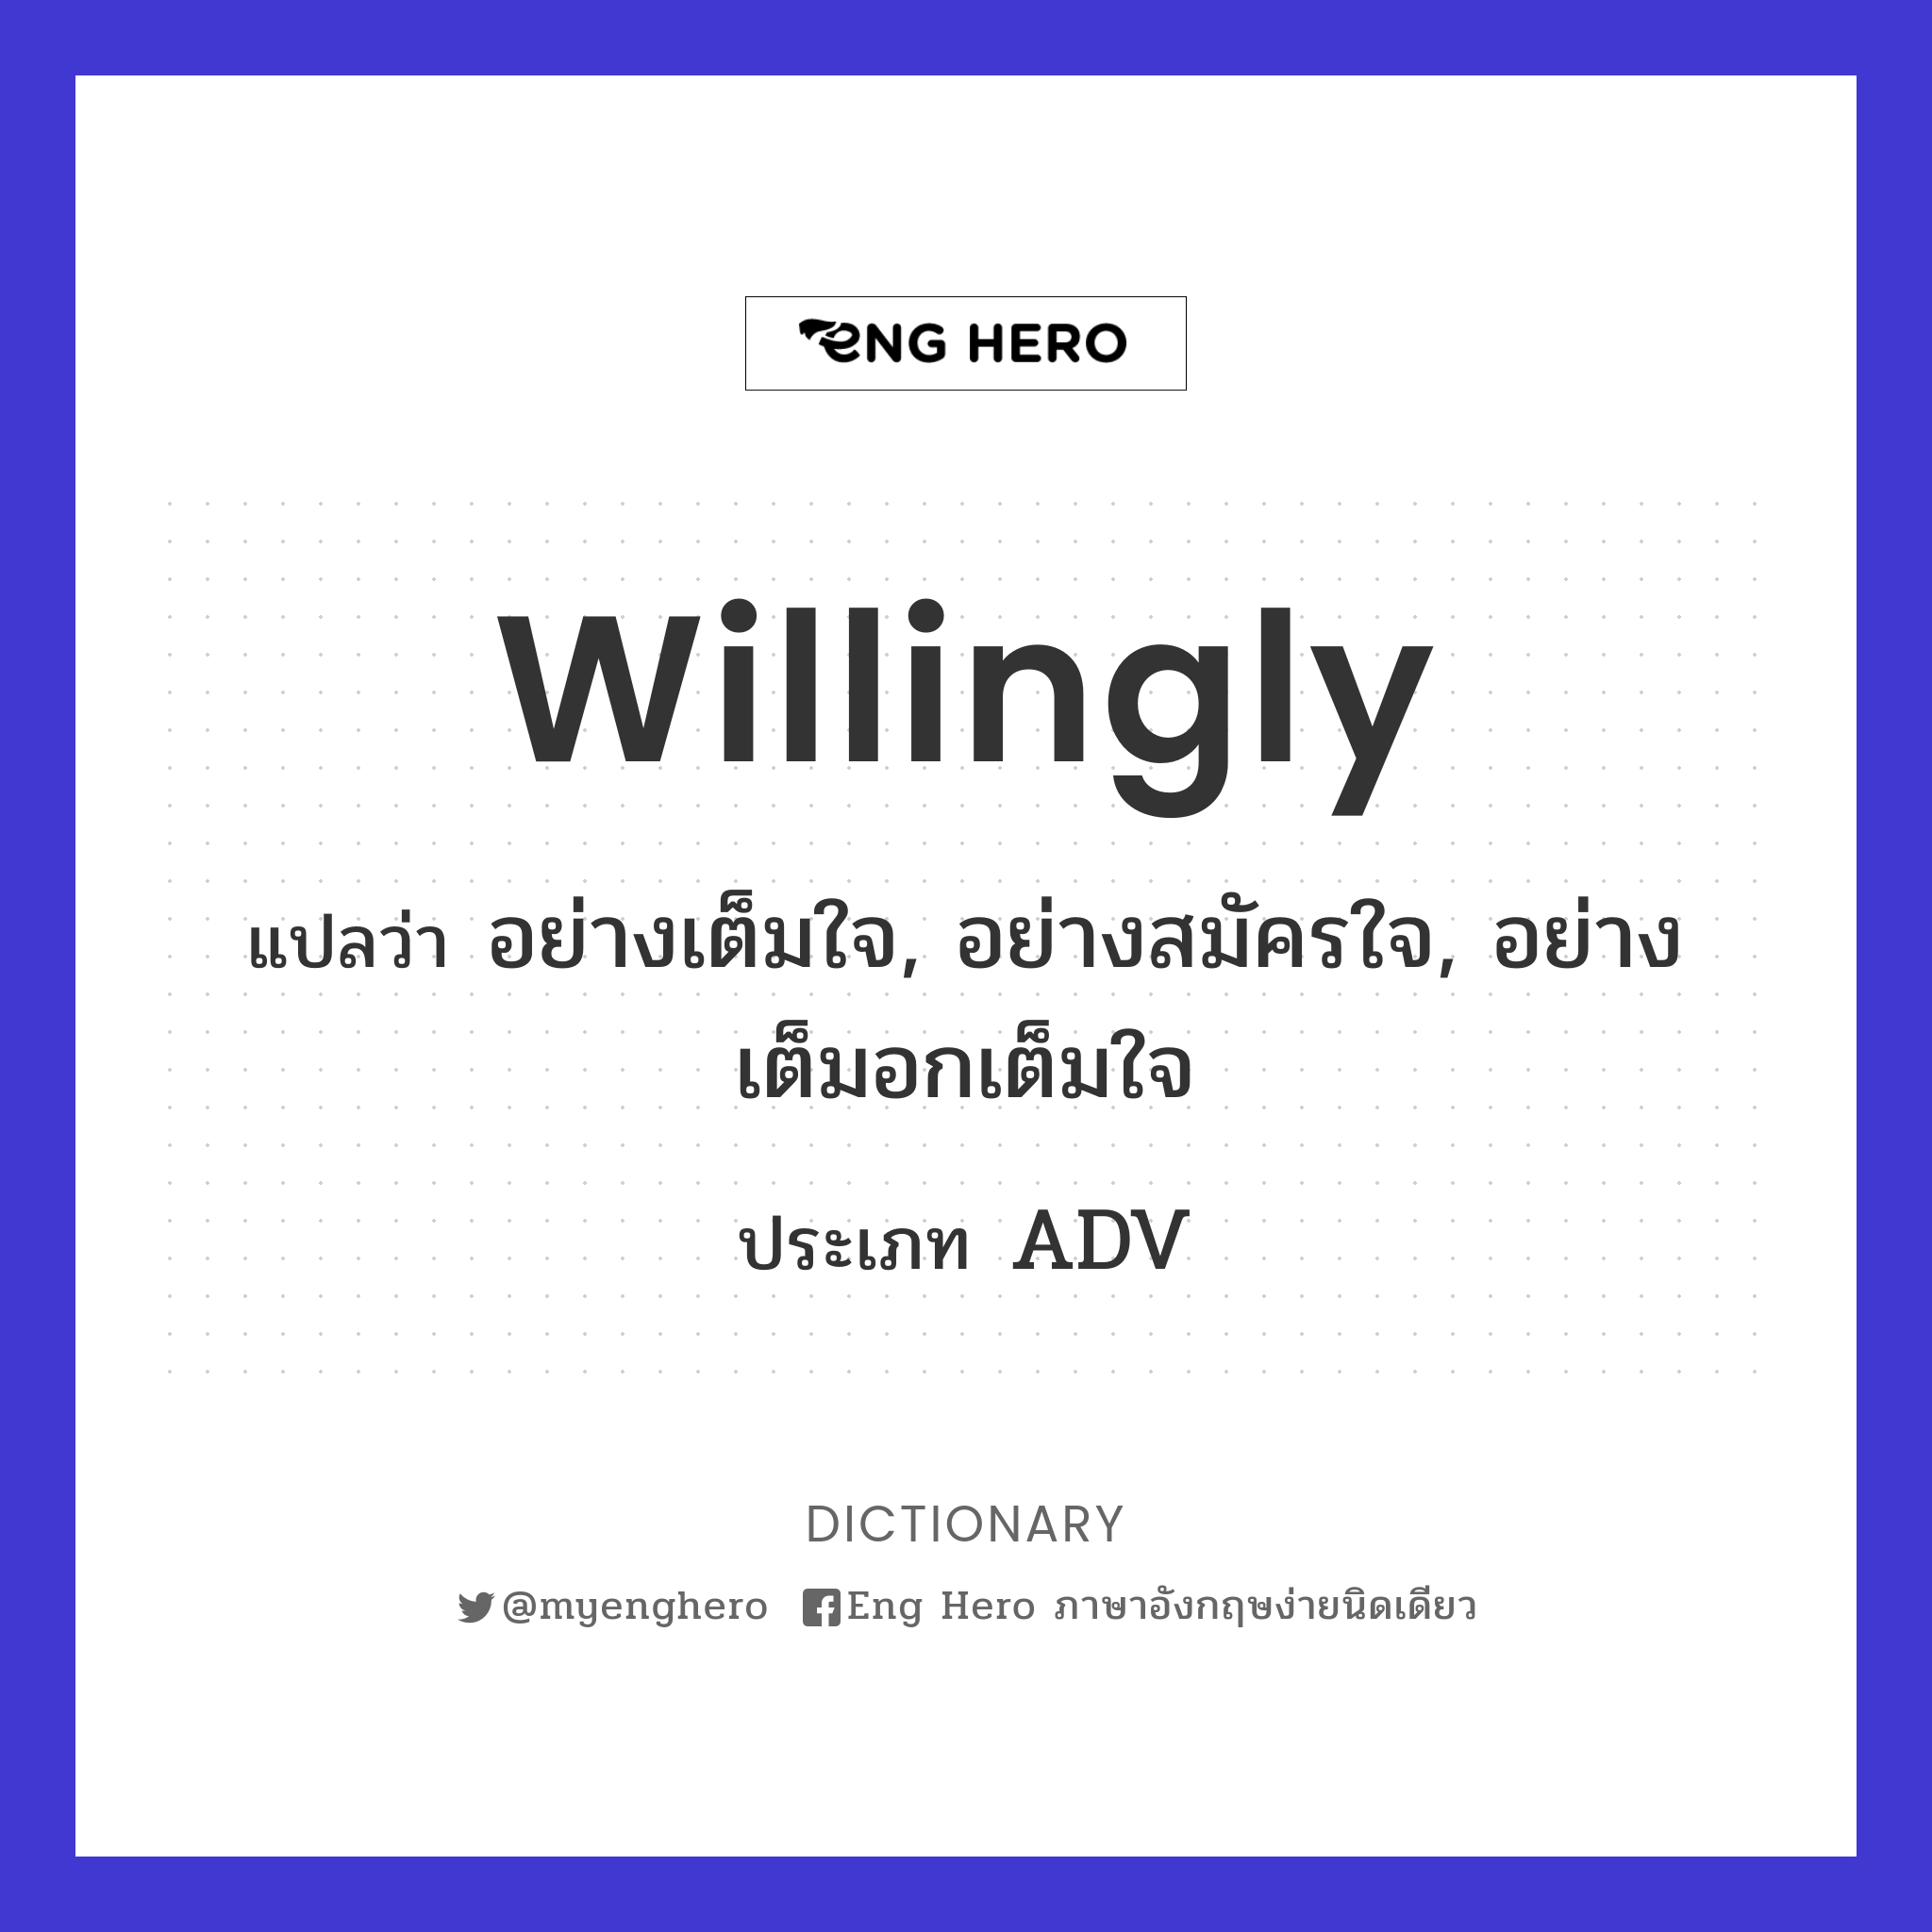 willingly